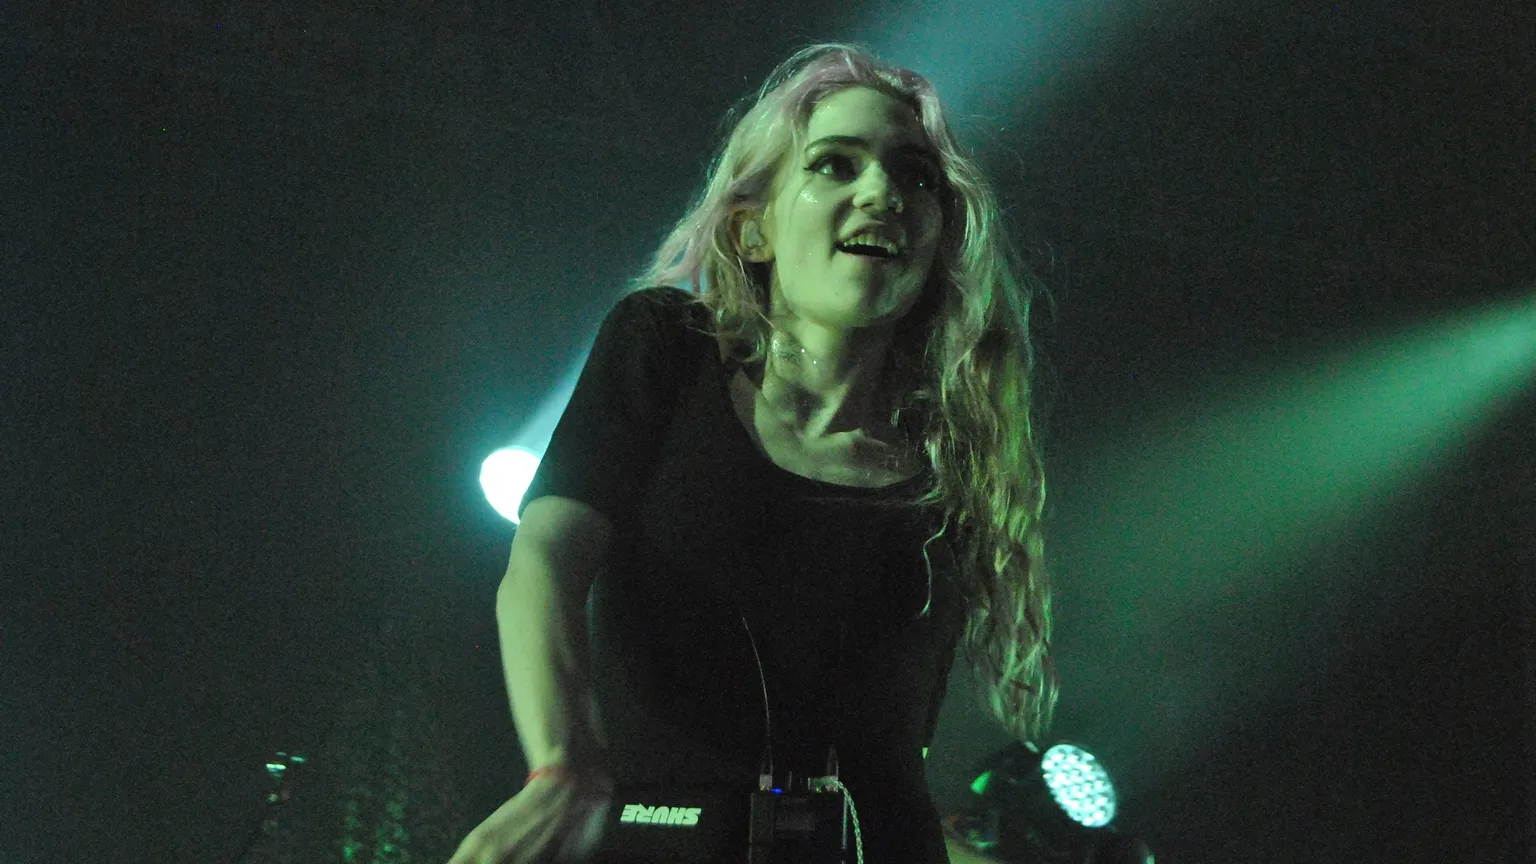 Musician Grimes at the Governors Ball in New York in 2014. Image: Jordan Uhl/Flickr